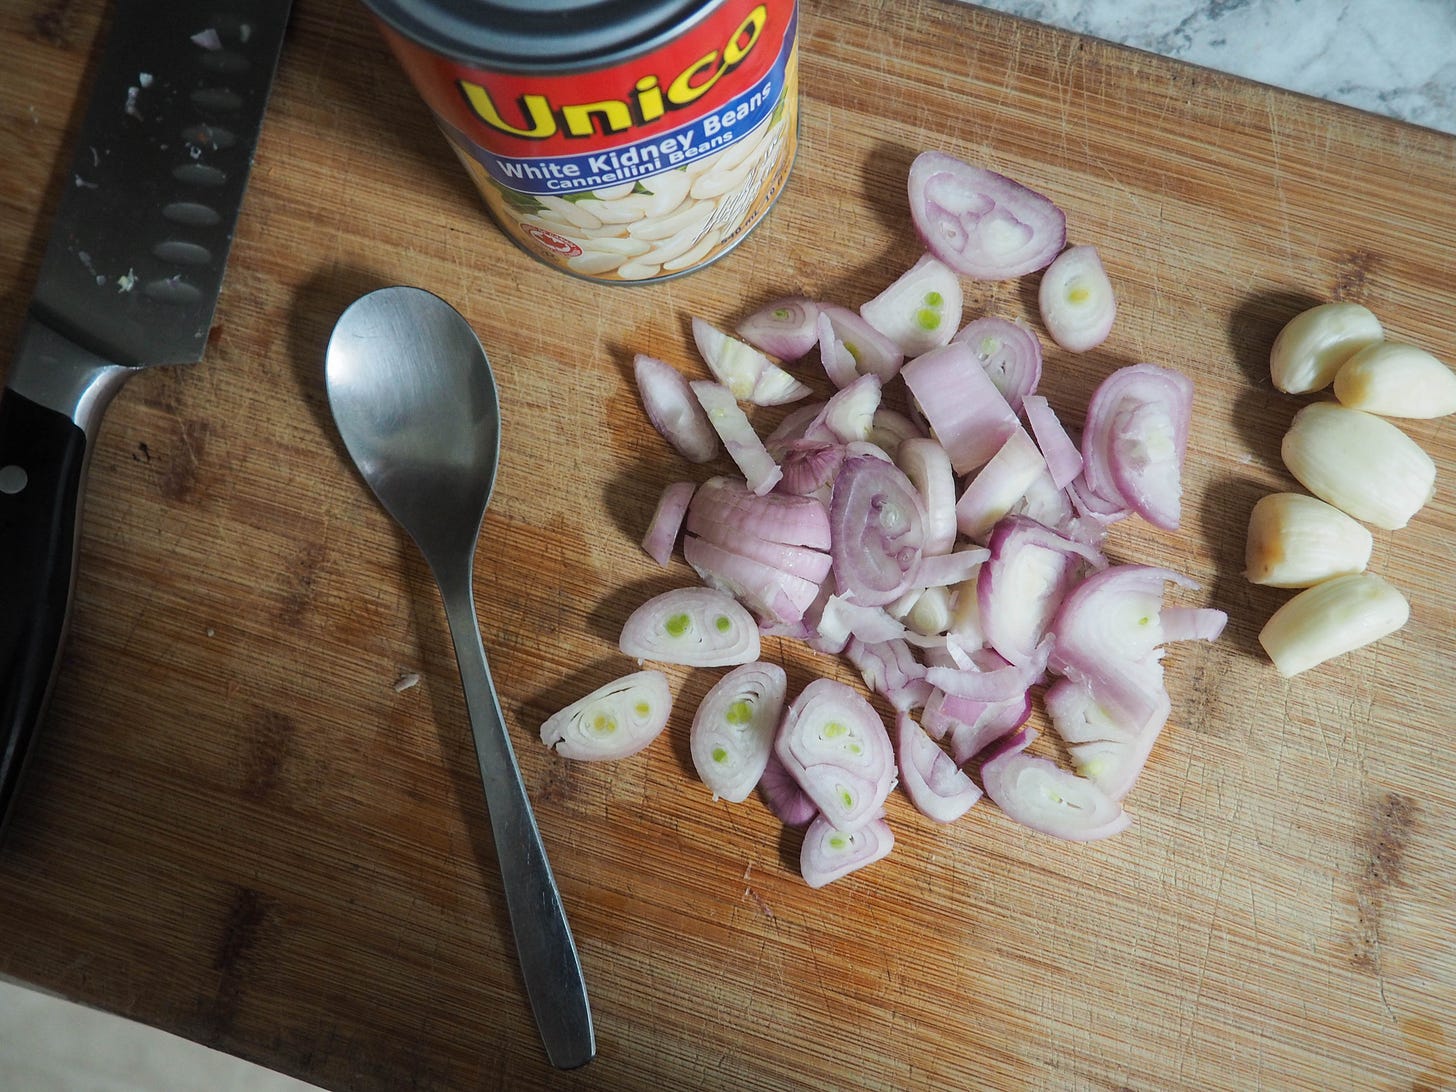 Reference photo for those working without a scale. This is approximately 4-5 small shallots and 5 large cloves of garlic. The spoon is an average tablespoon for scale.